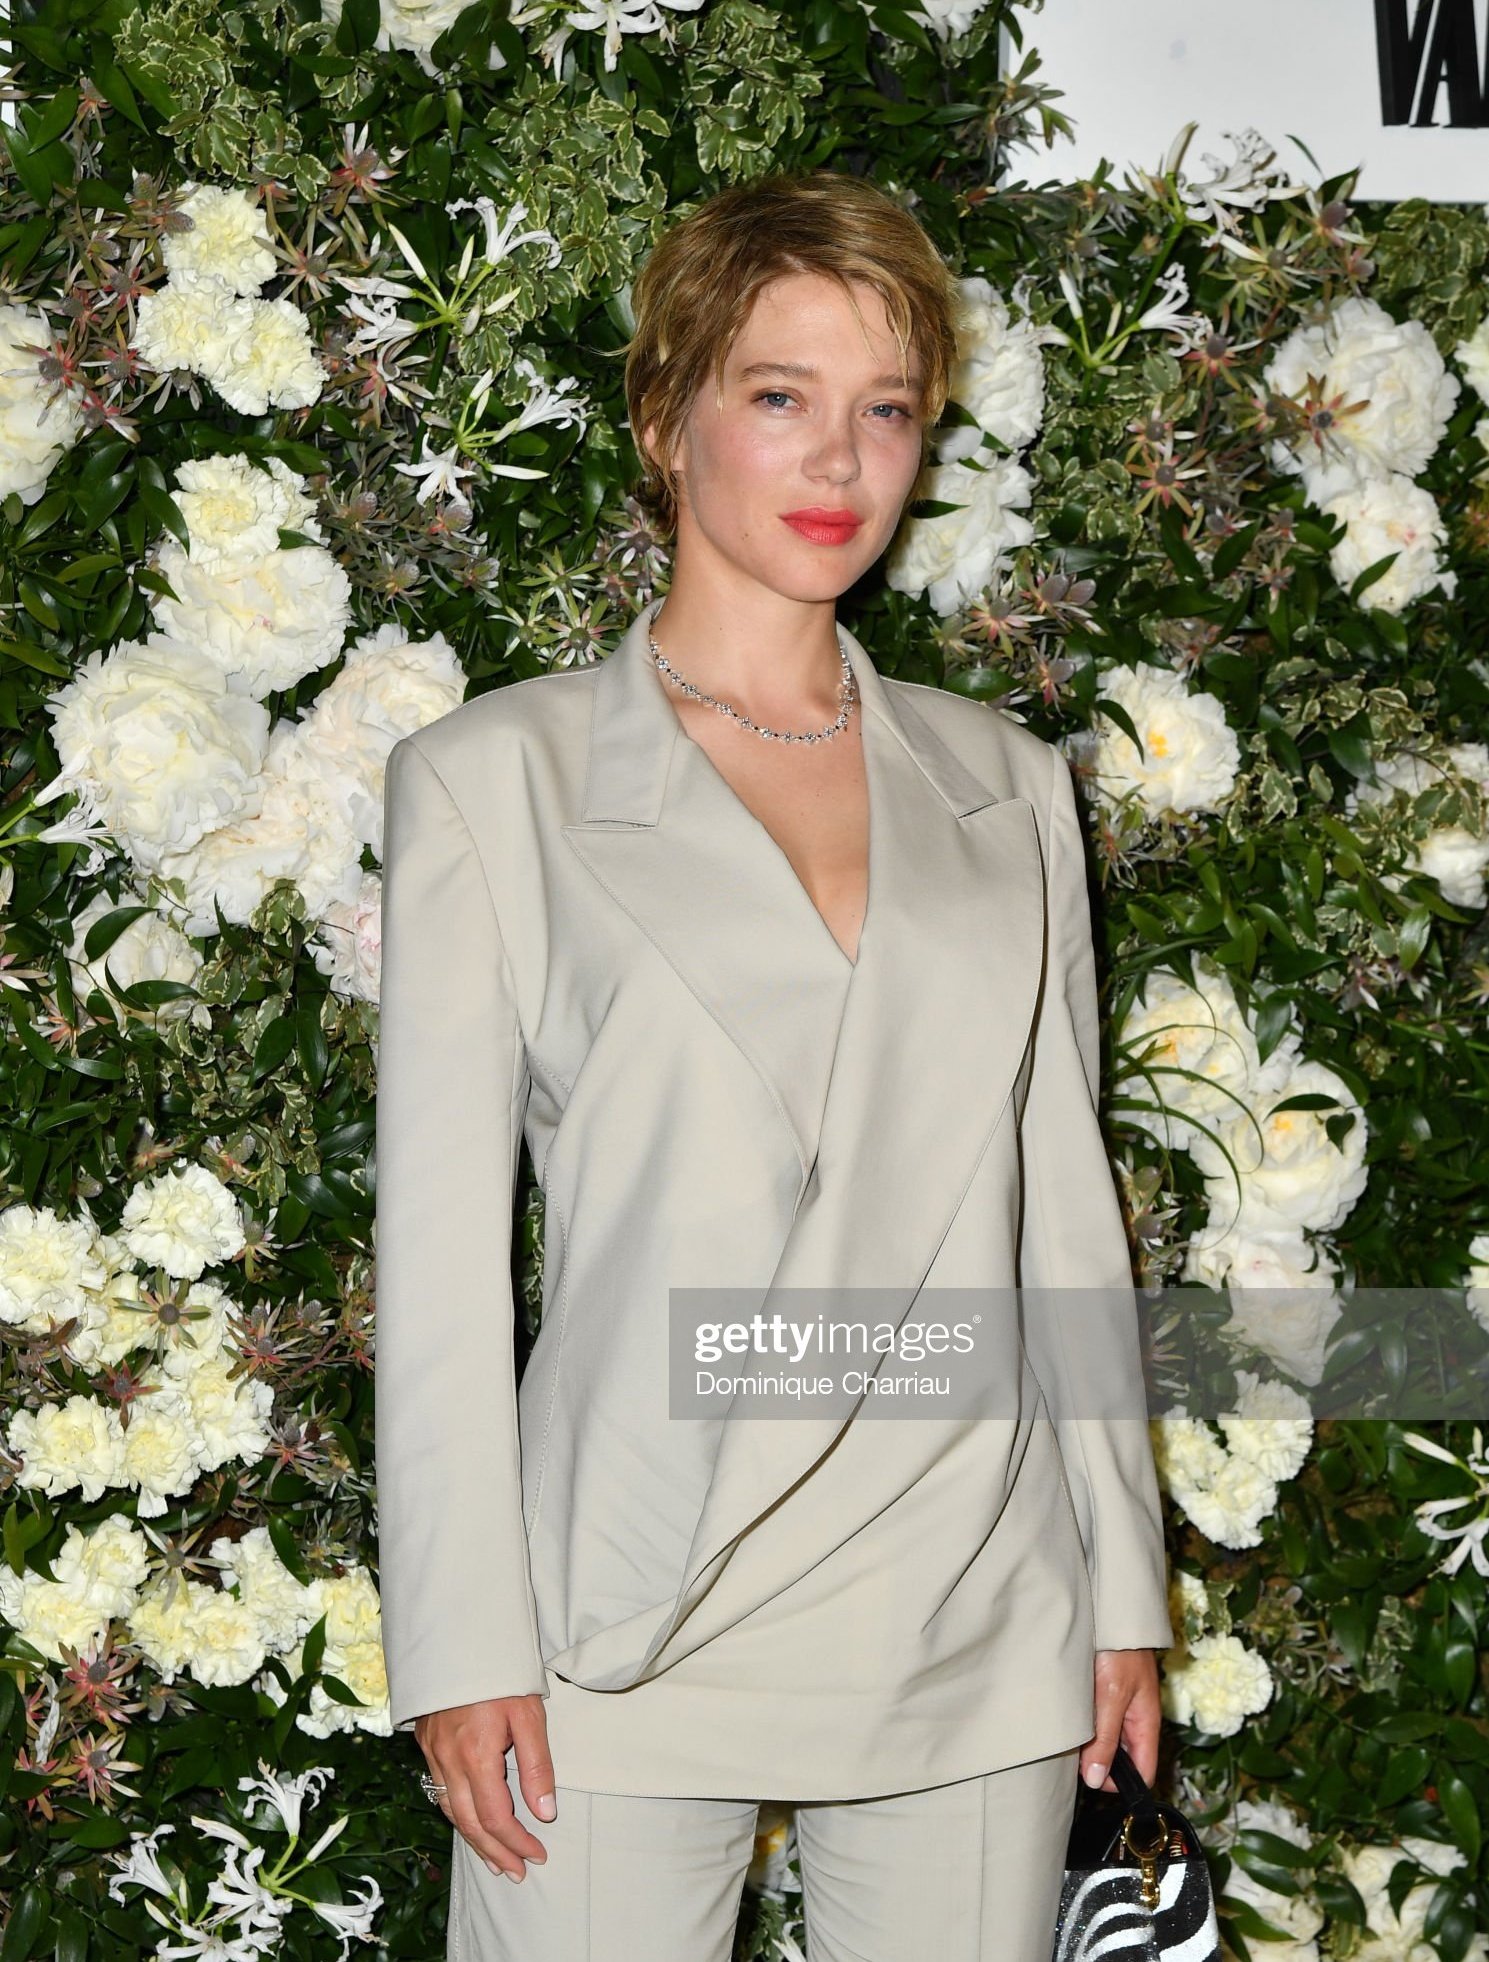 Louis Vuitton For Vanity Fair Dinner During 75th Cannes Film